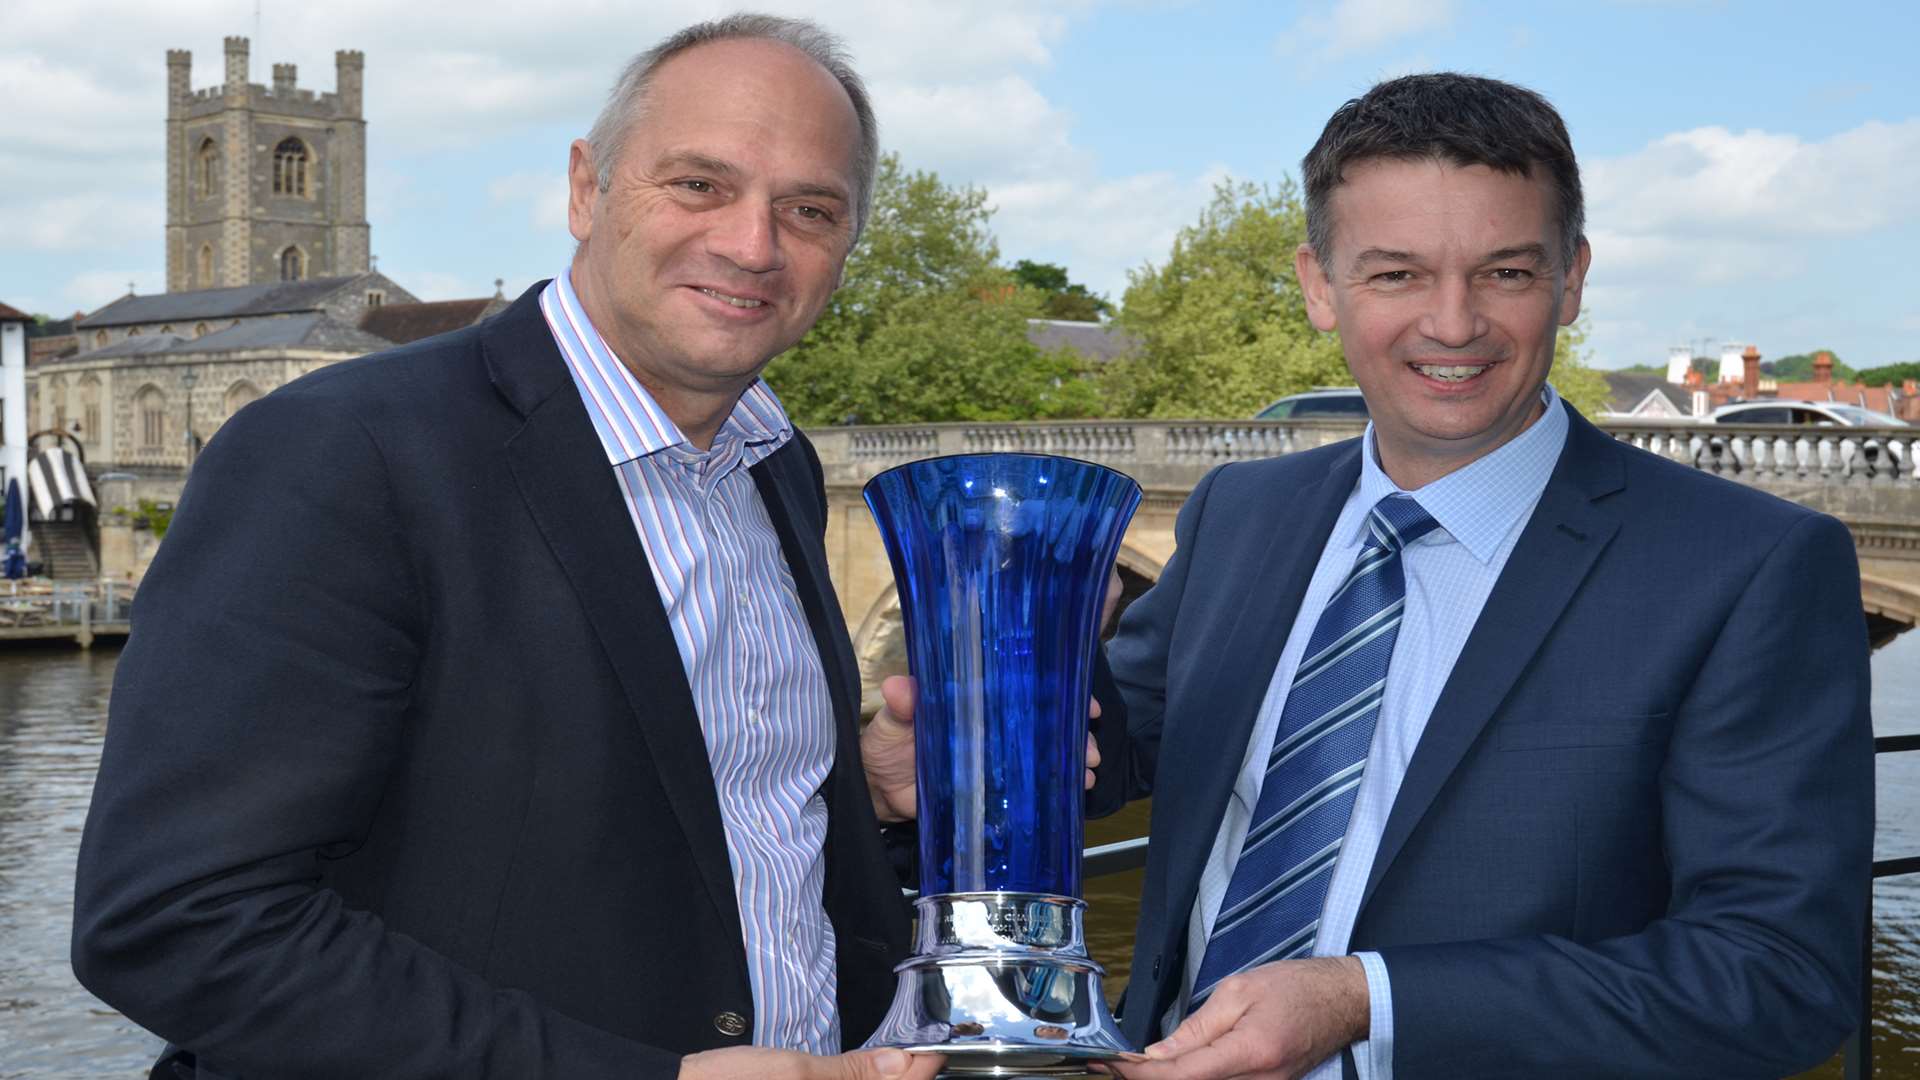 Steve Ottewill presents the Redgrave Challenge Vase to Olympic legend Sir Steve Redgrave at the Henley Royal Regatta this year